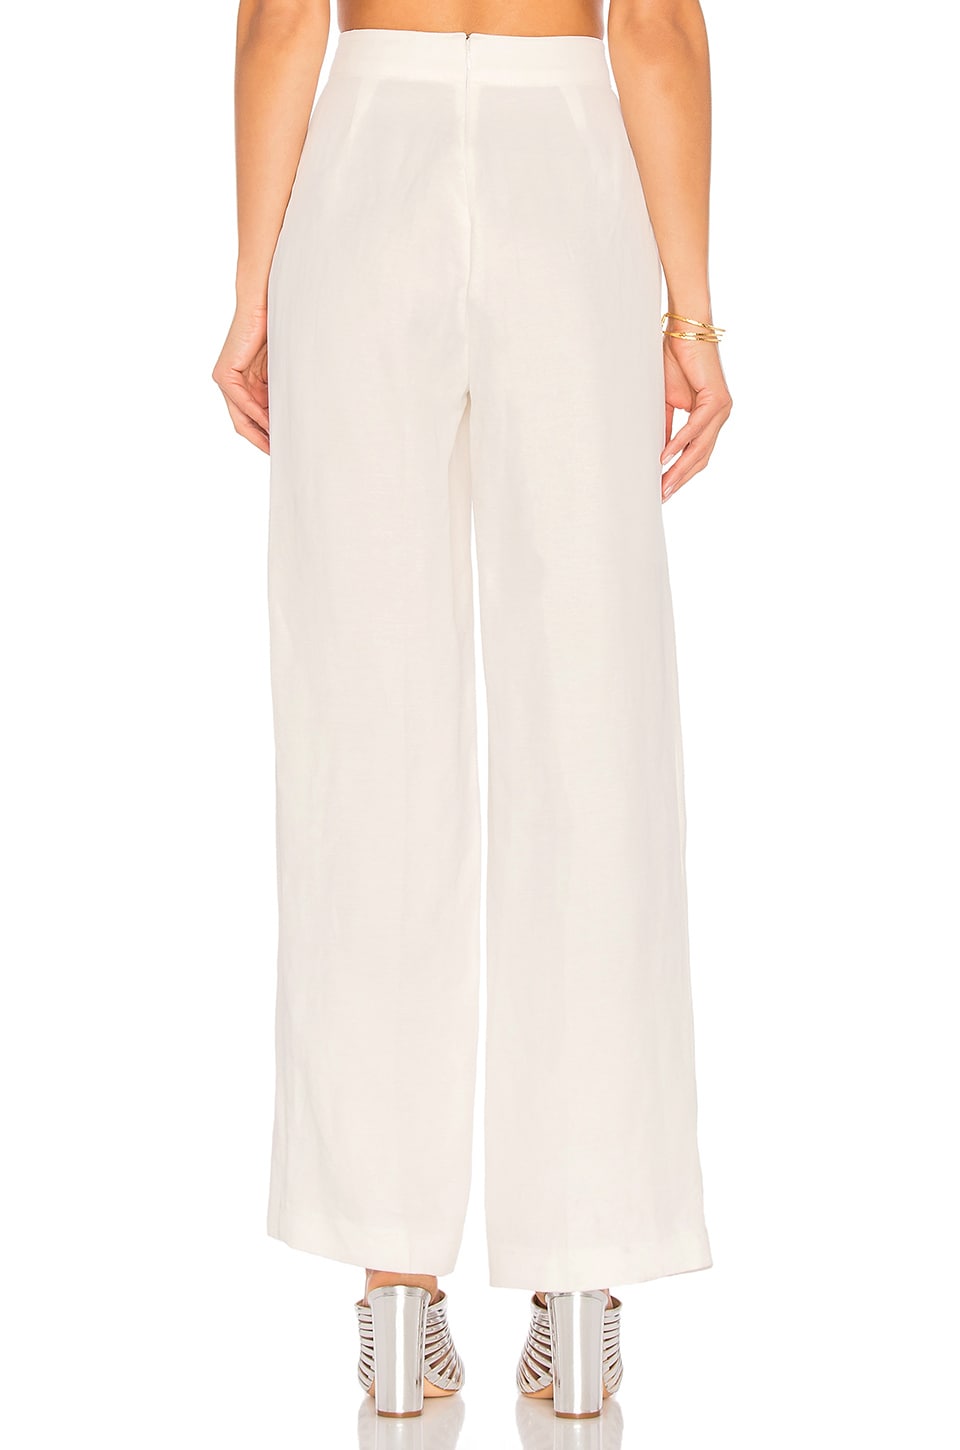 CUPCAKES AND CASHMERE 'Studio' Wide Leg Pants in White | ModeSens